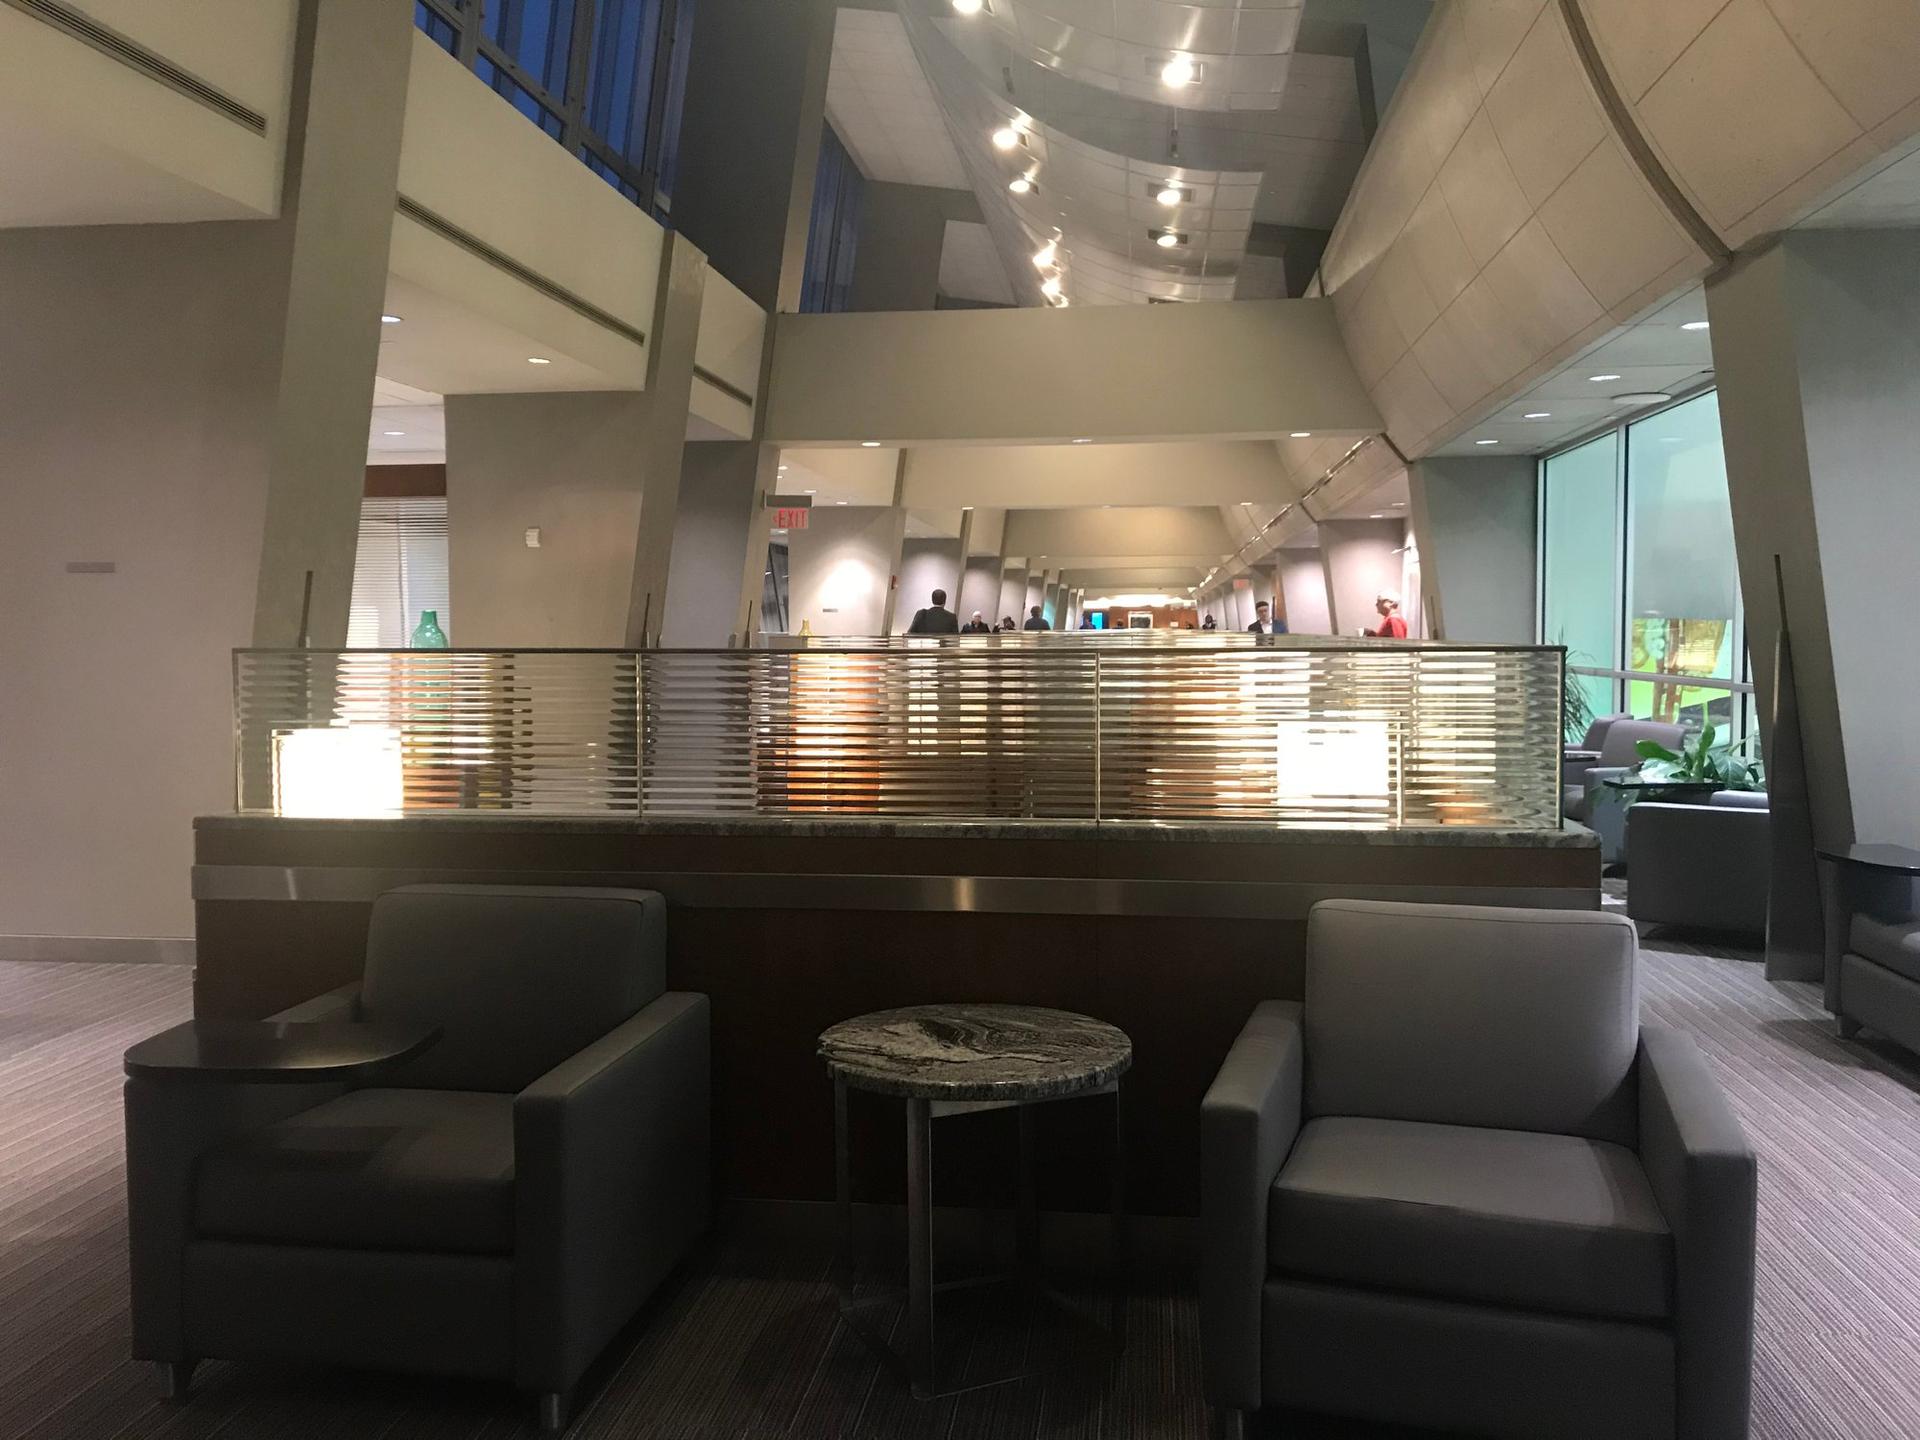 American Airlines Admirals Club image 27 of 48